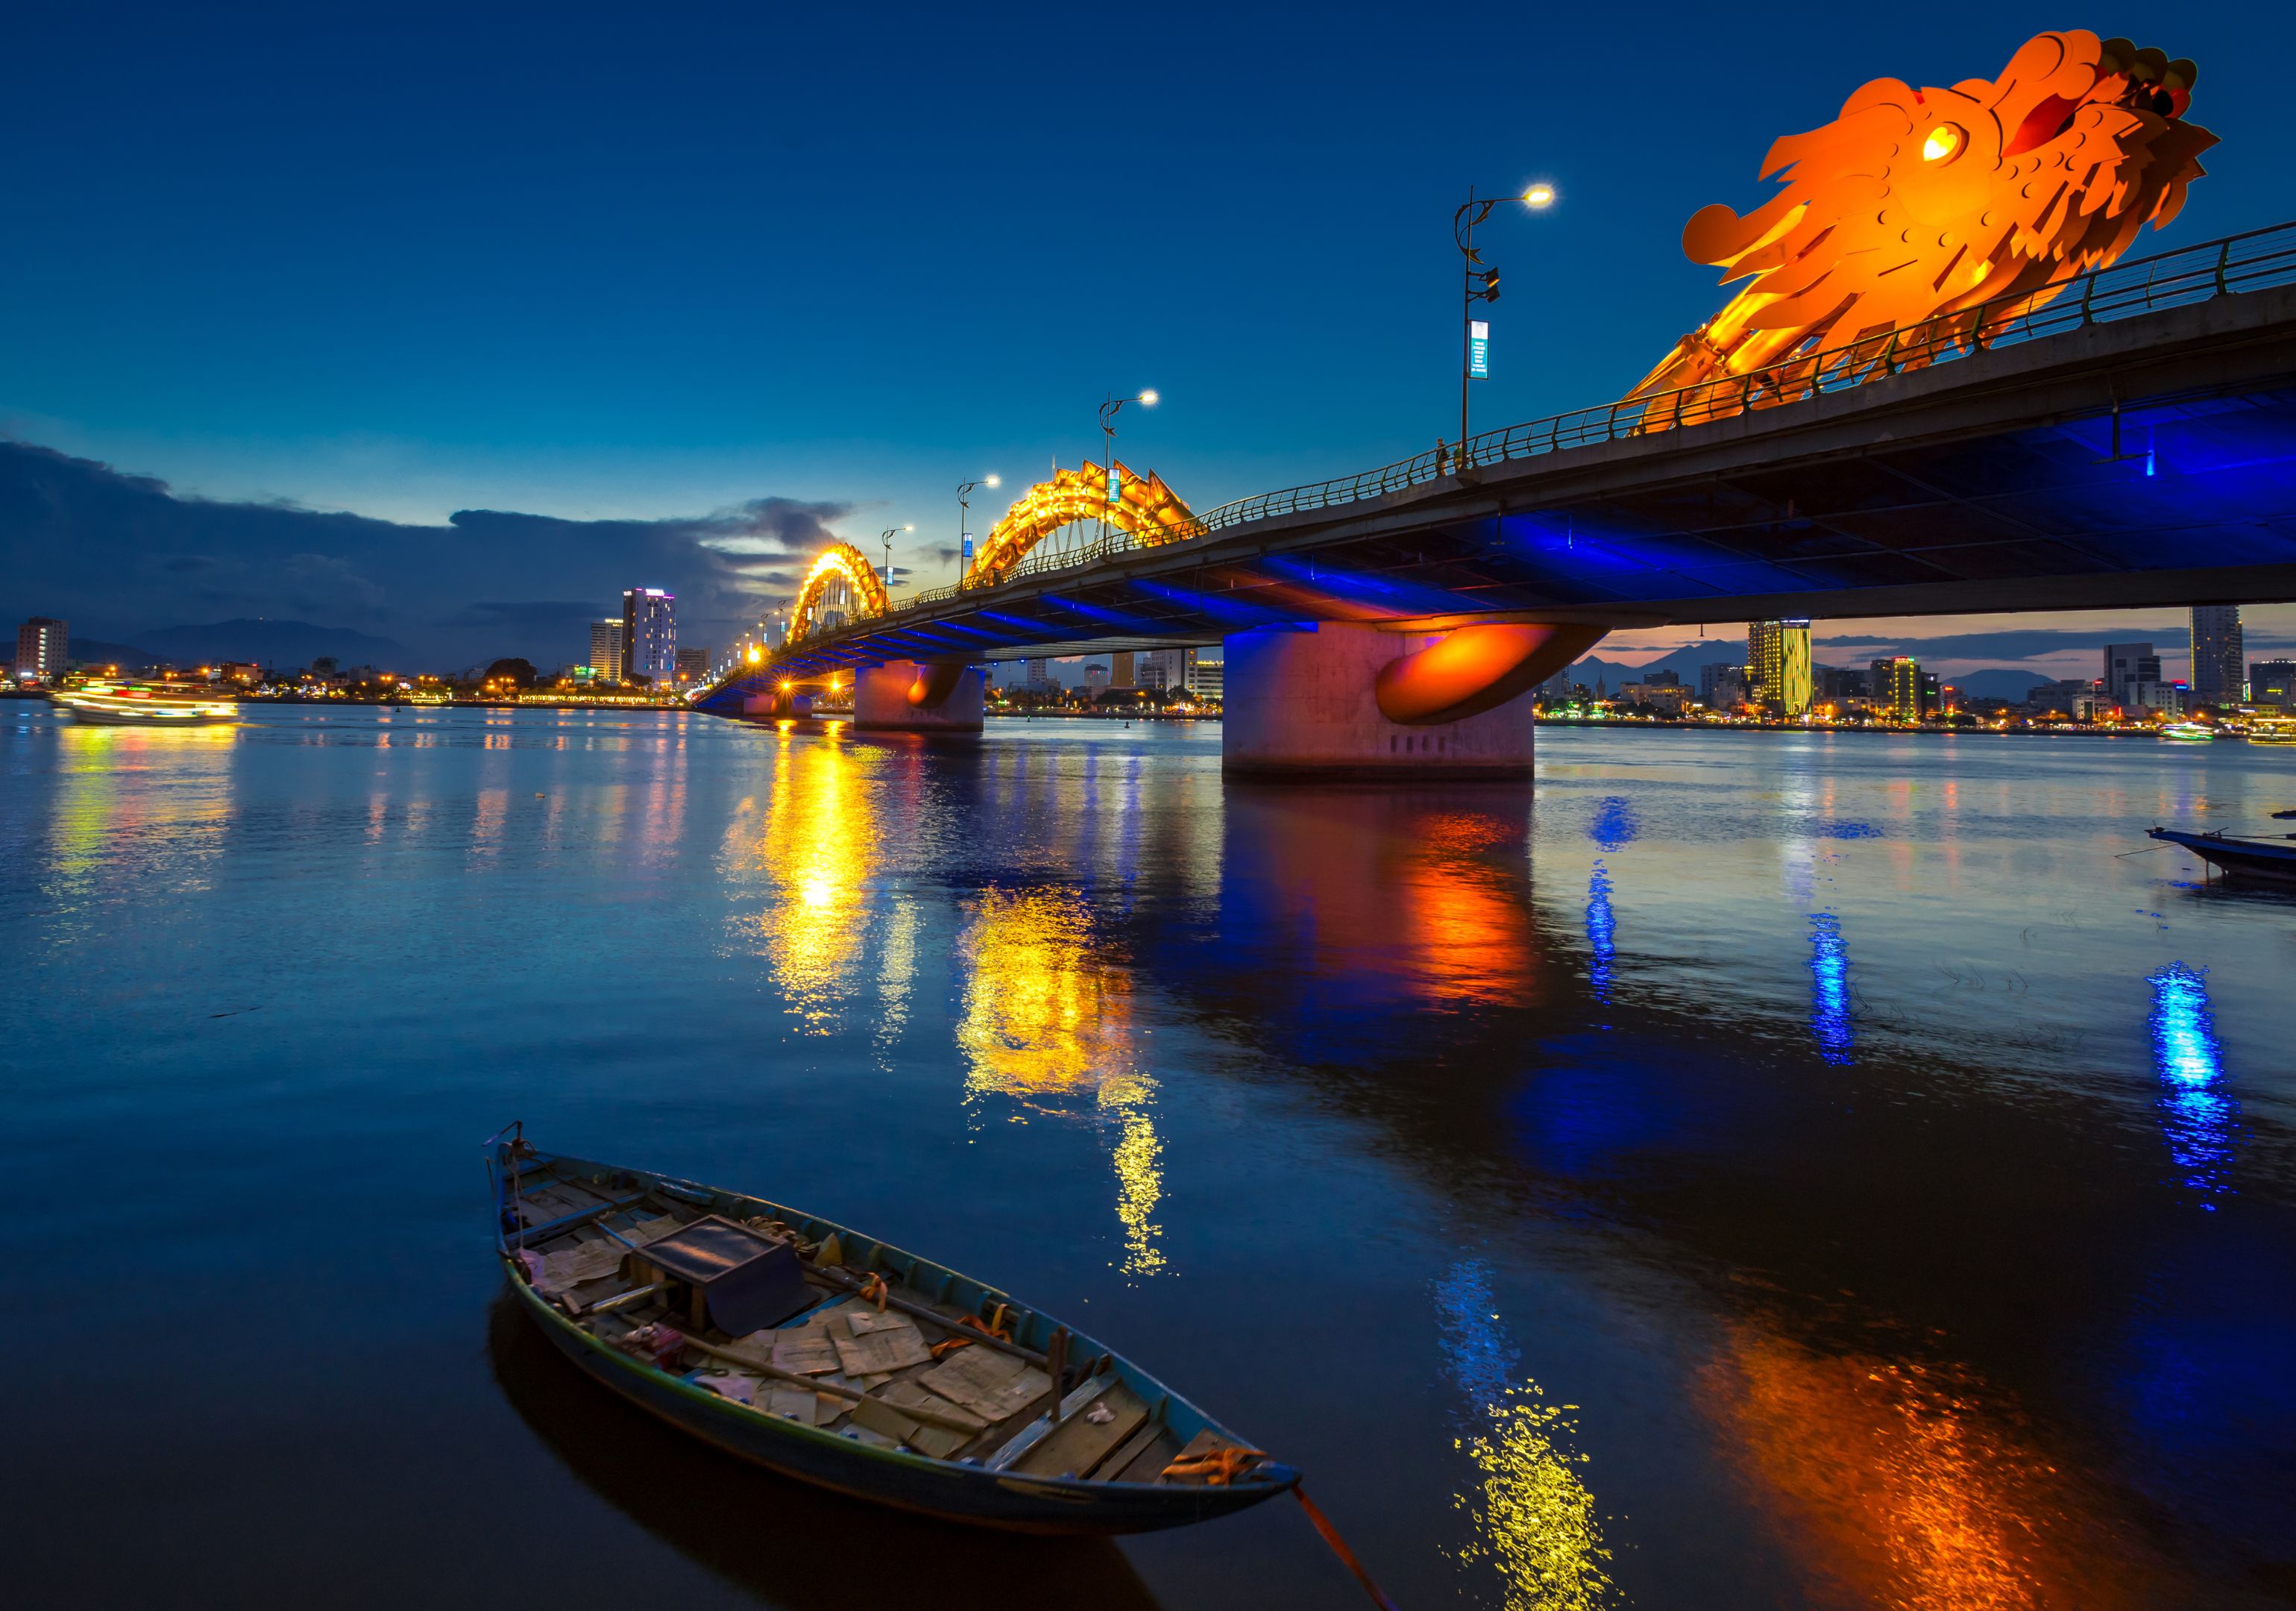 Dragon Bridge in Danang at night, with reflections on the river.